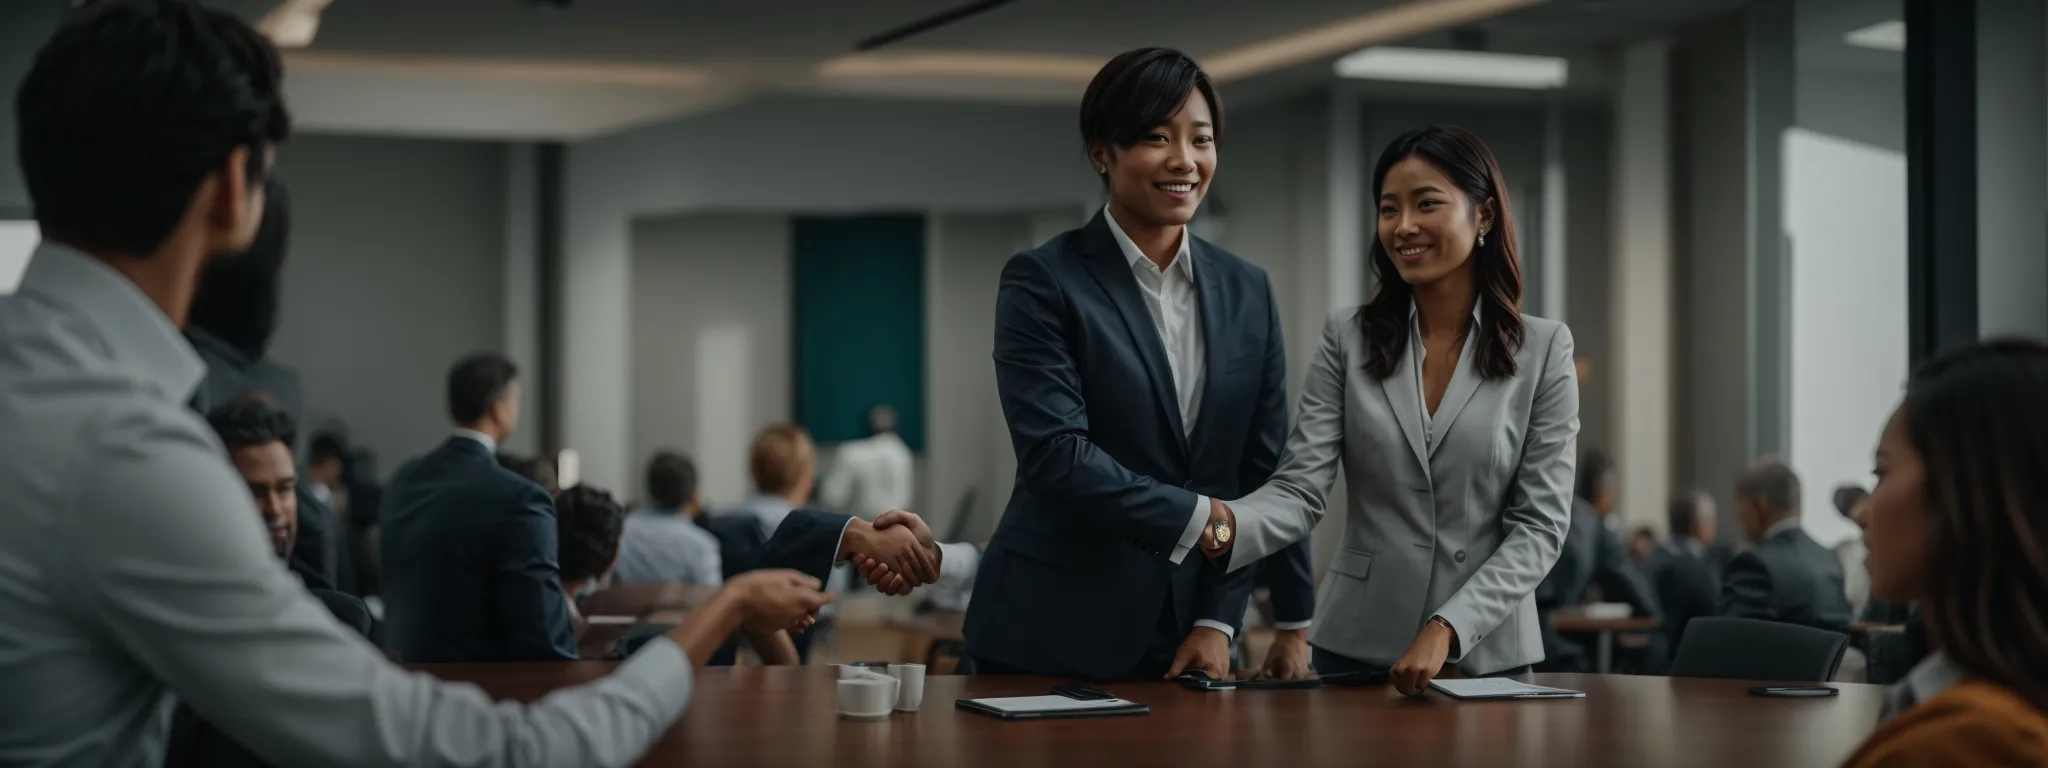 a confident business person shaking hands in a bustling conference room, symbolizing partnerships and endorsements.